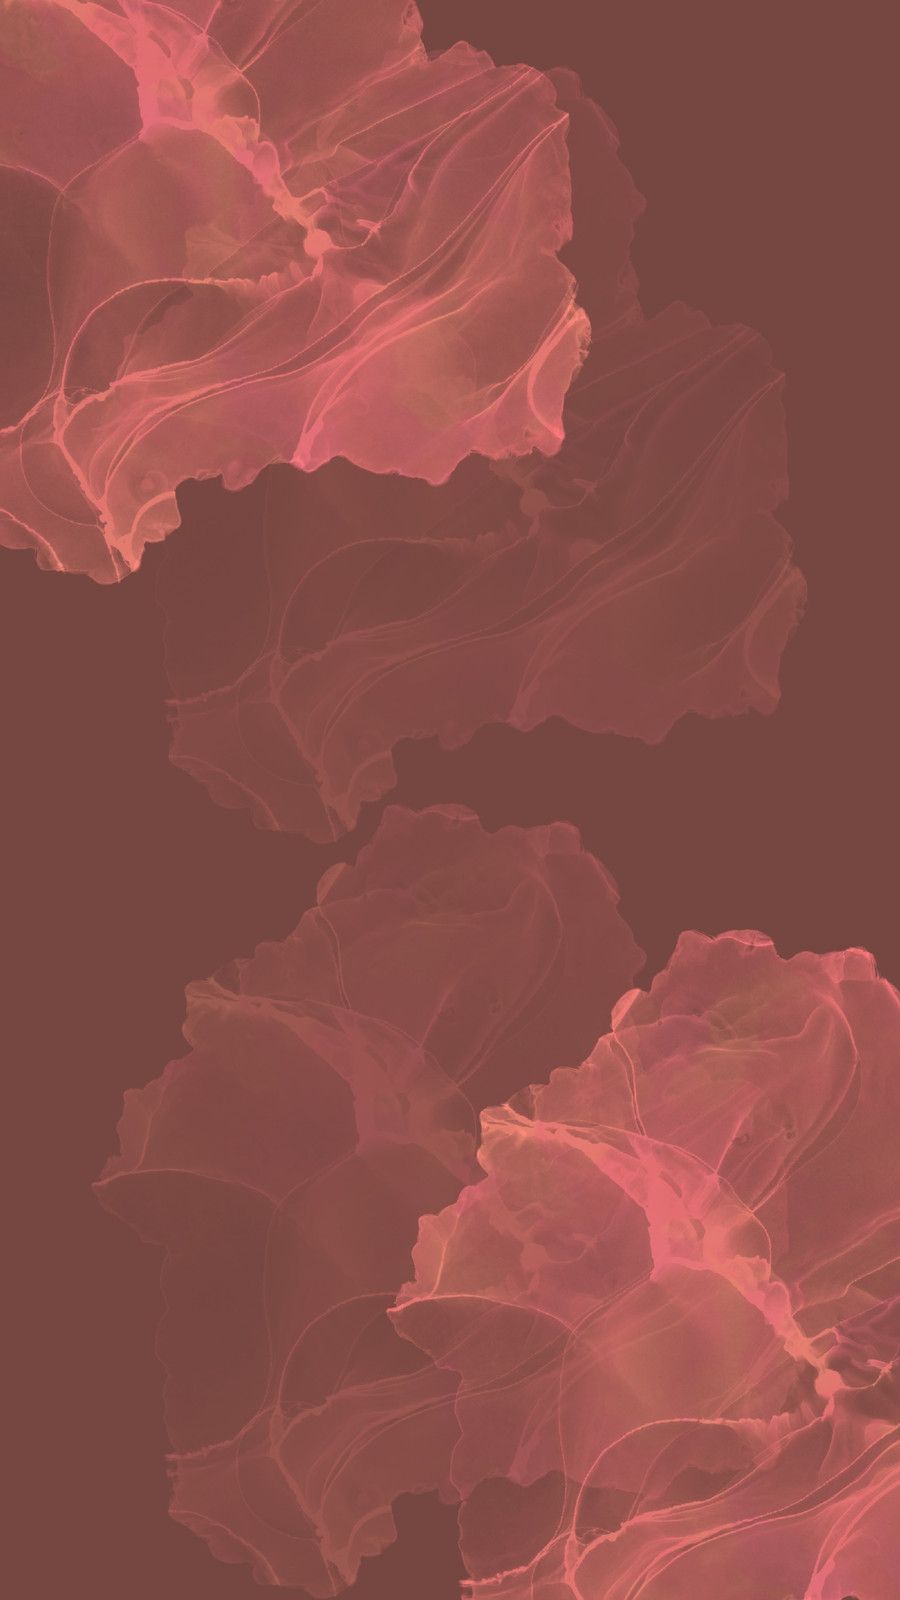 Aesthetic maroon wallpaper with abstract flowers. Perfect for phone and desktop backgrounds. Download now for free. - Red